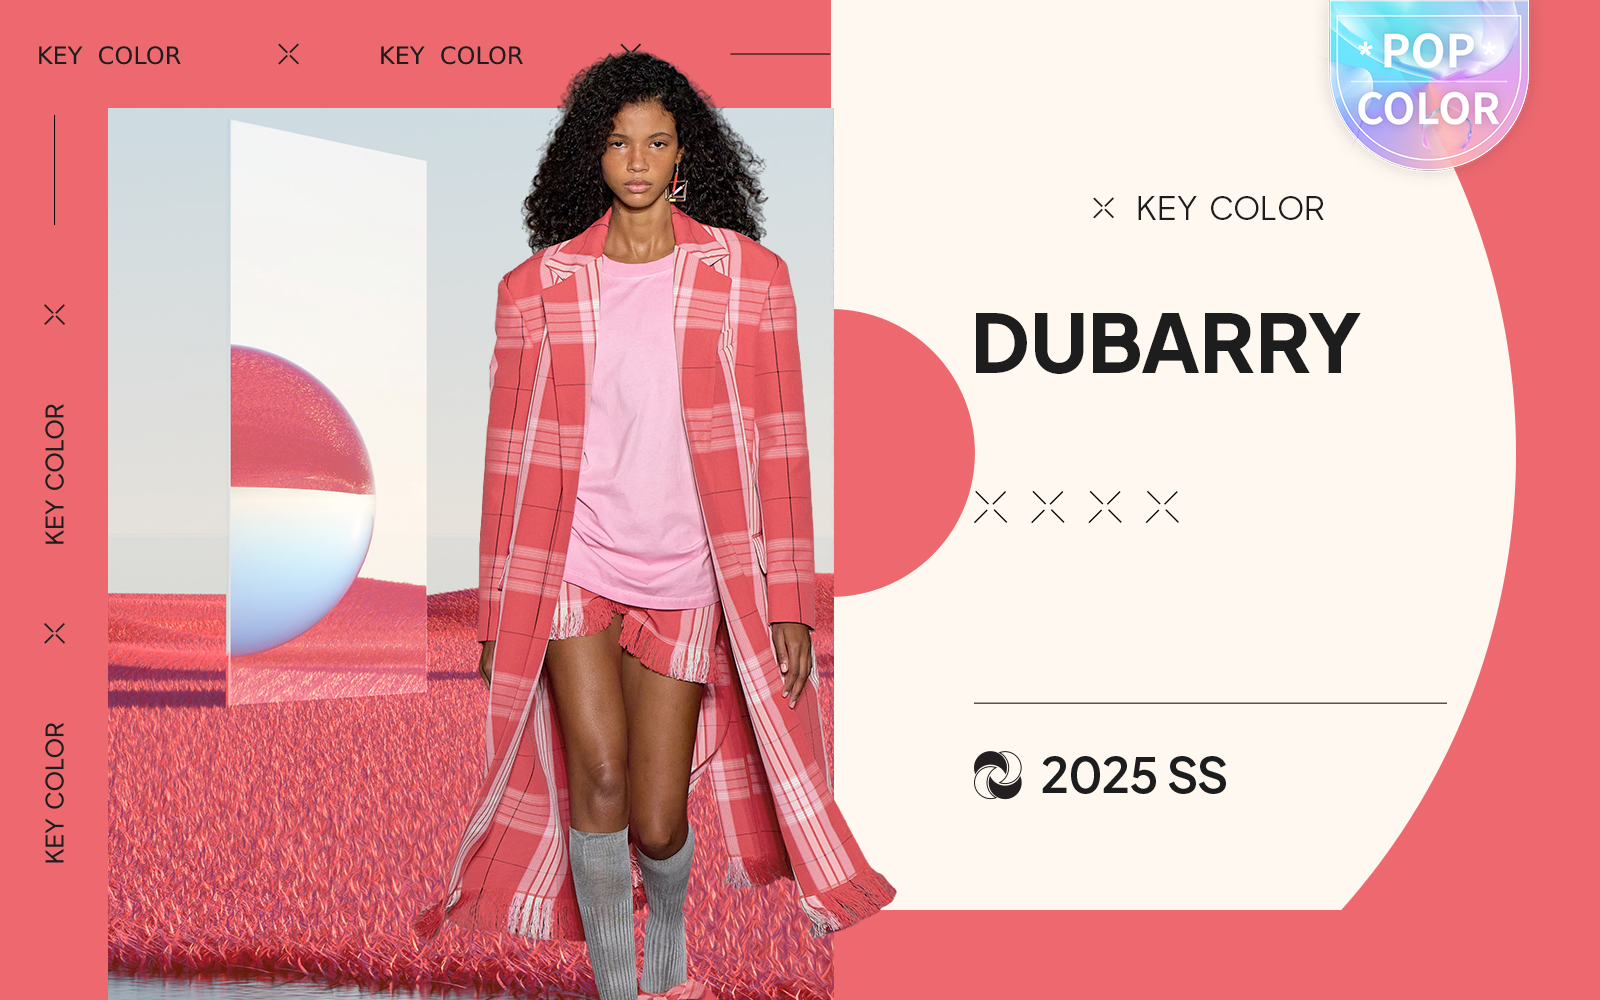 Dubarry -- The Color Trend for Womenswear